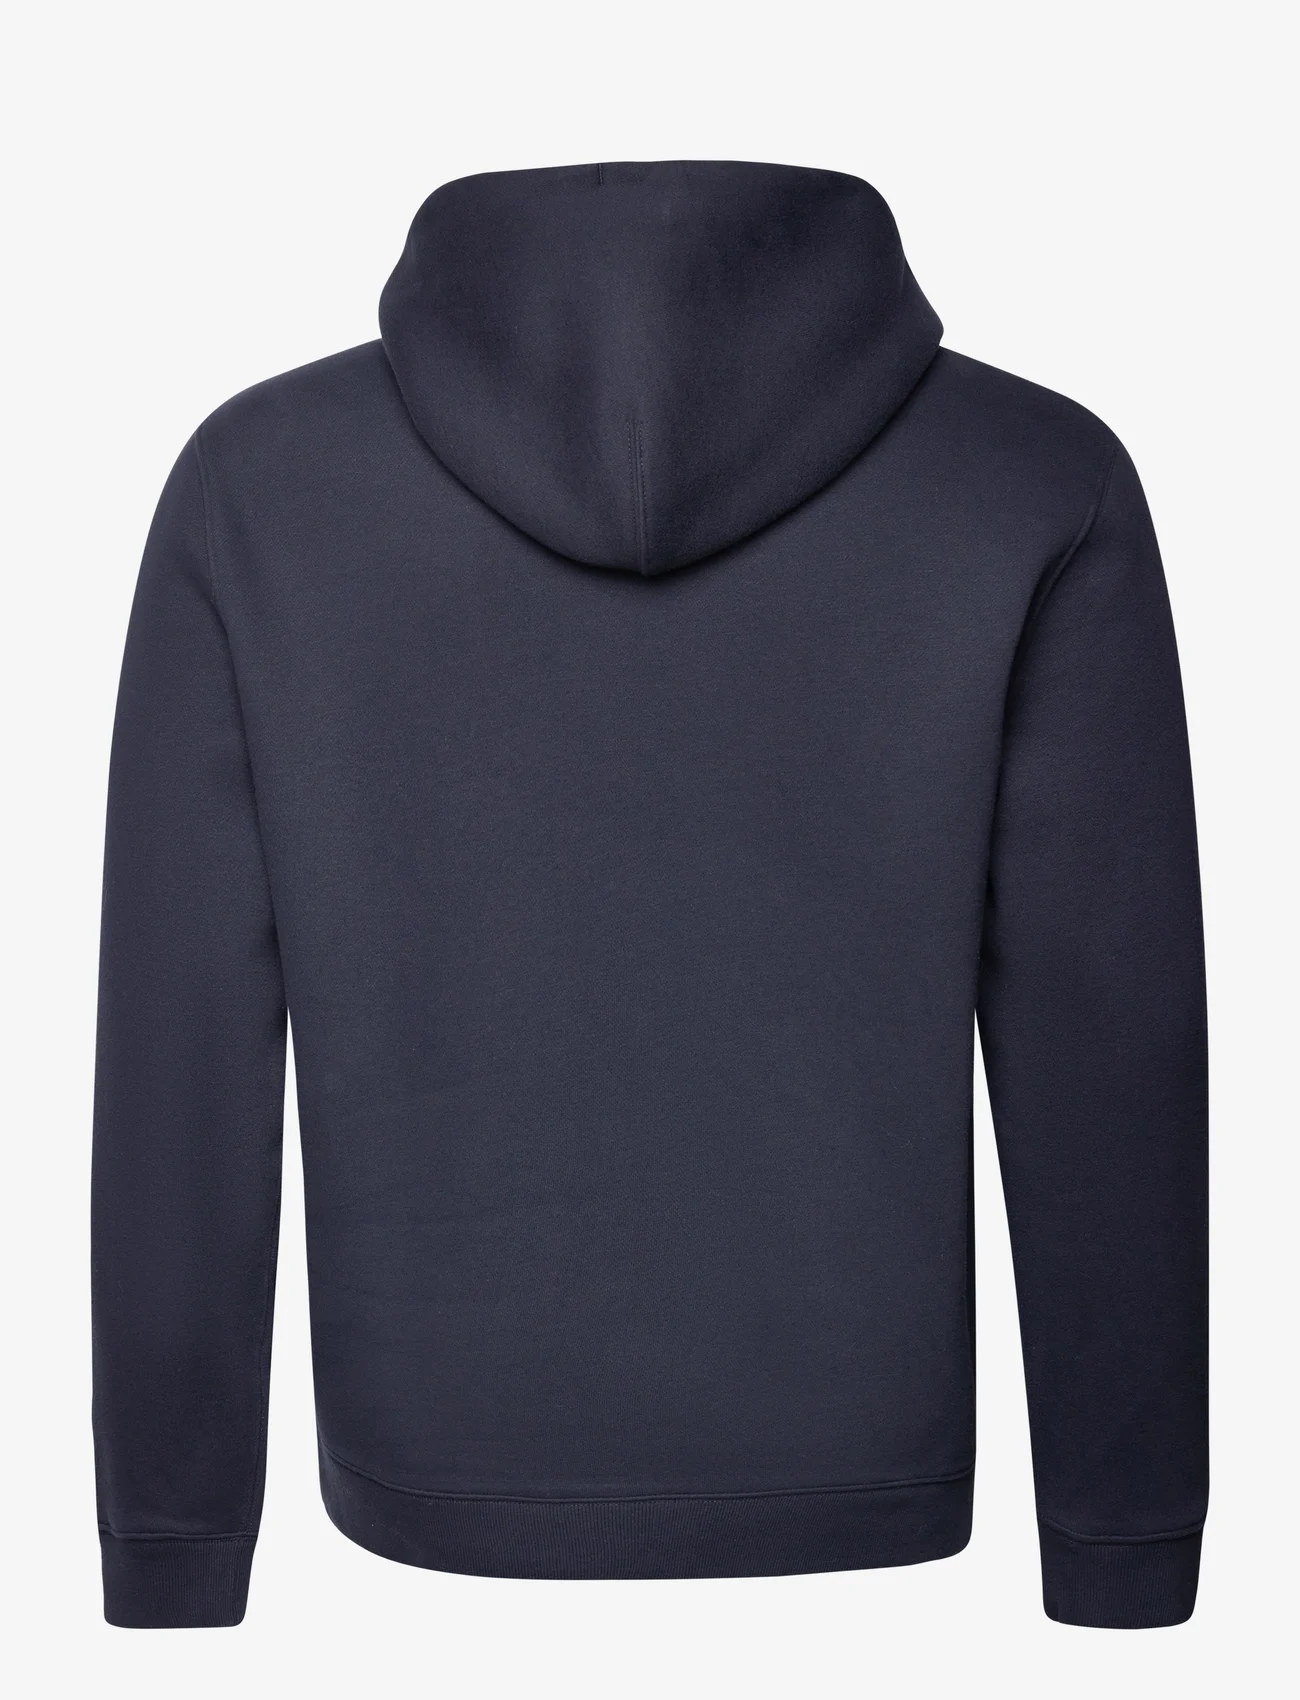 Abercrombie & Fitch - ANF MENS SWEATSHIRTS - hoodies - navy - 1